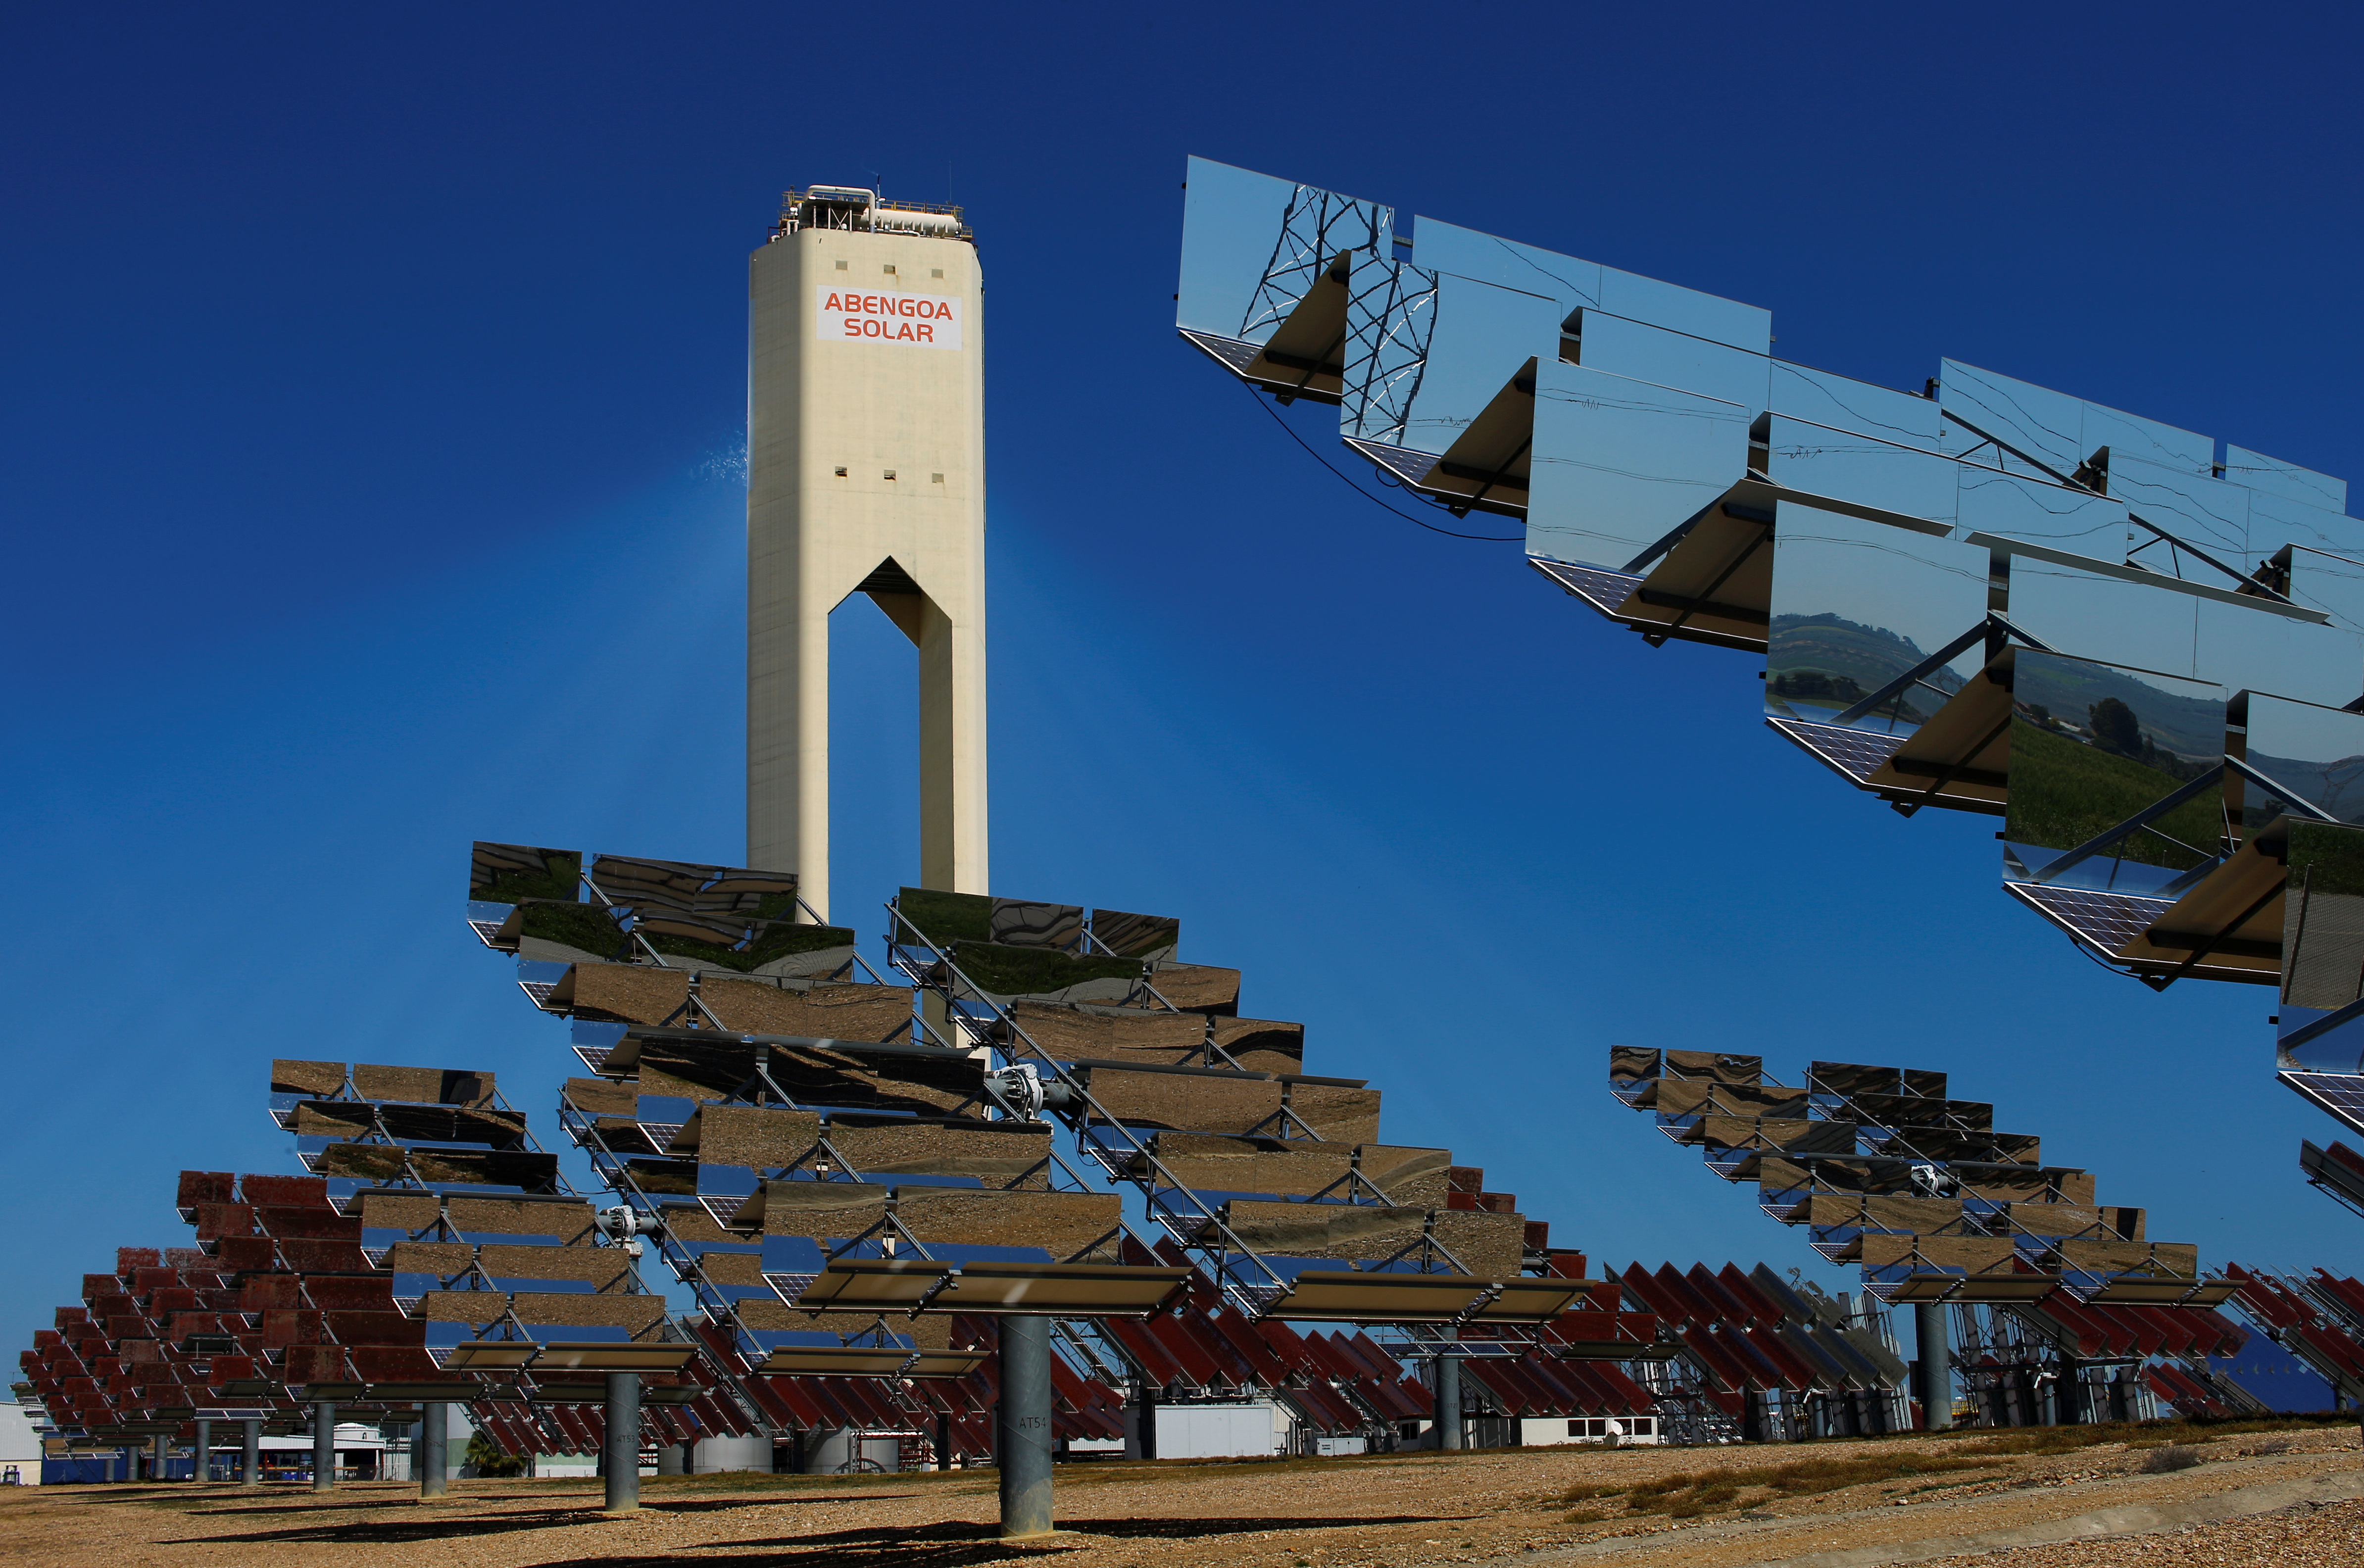 A tower and solar panels belonging to Abengoa are seen at the Solucar solar park in Sanlucar la Mayor